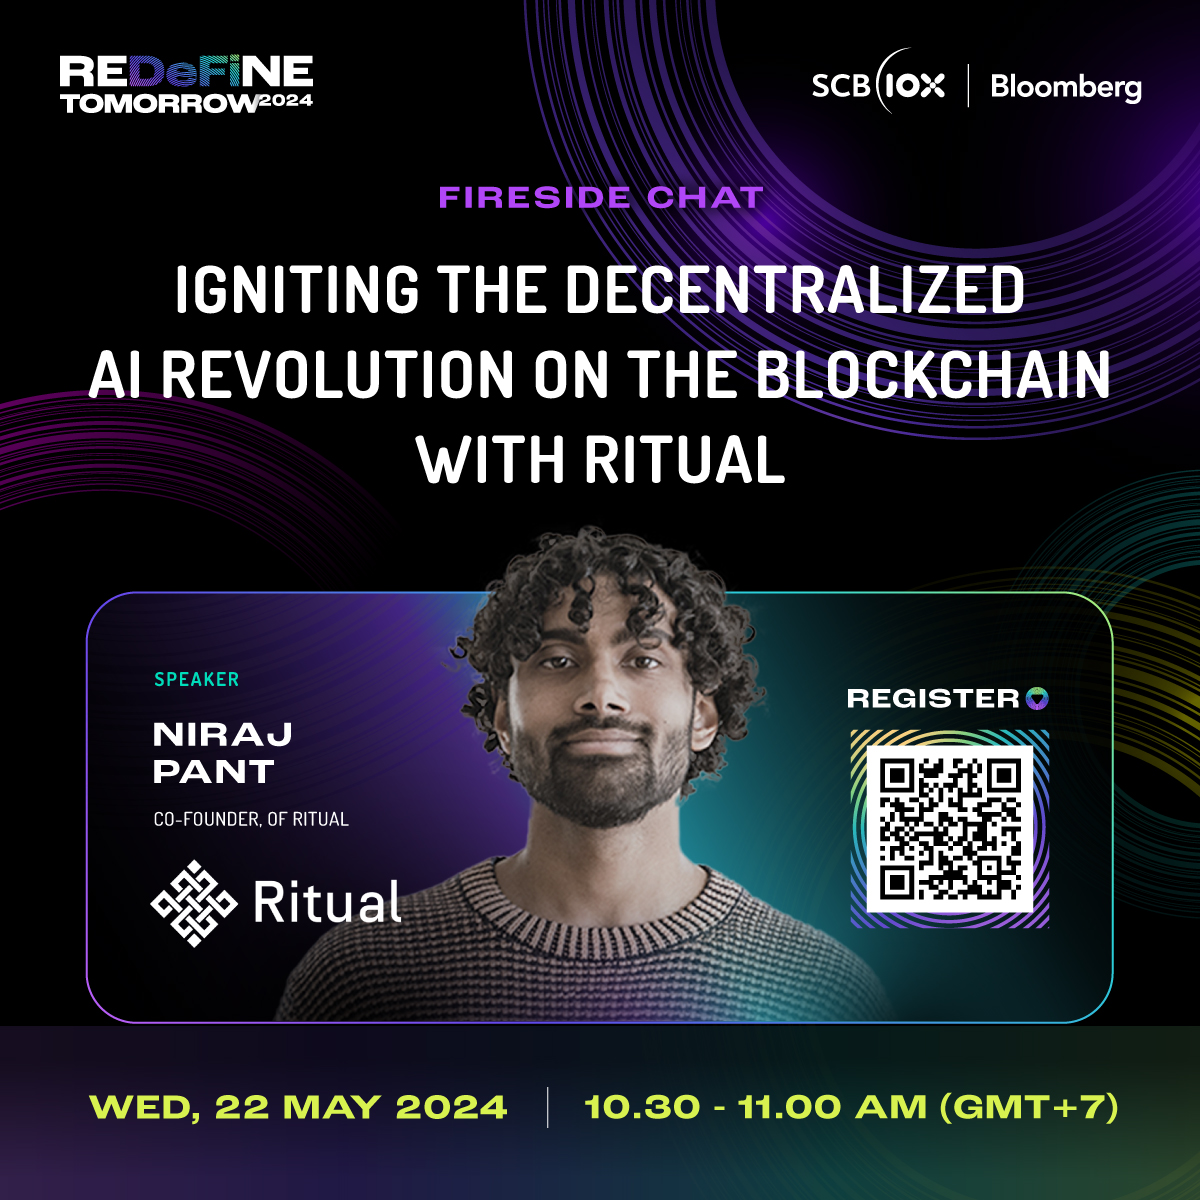 Meet the speaker at #REDeFiNETOMORROW2024 / 21-22 May 2024 Fireside Chat: Igniting the Decentralized AI Revolution on the Blockchain With Ritual @niraj of @ritualnet Free ticket: bloombergevents.com/SCB10x_2024